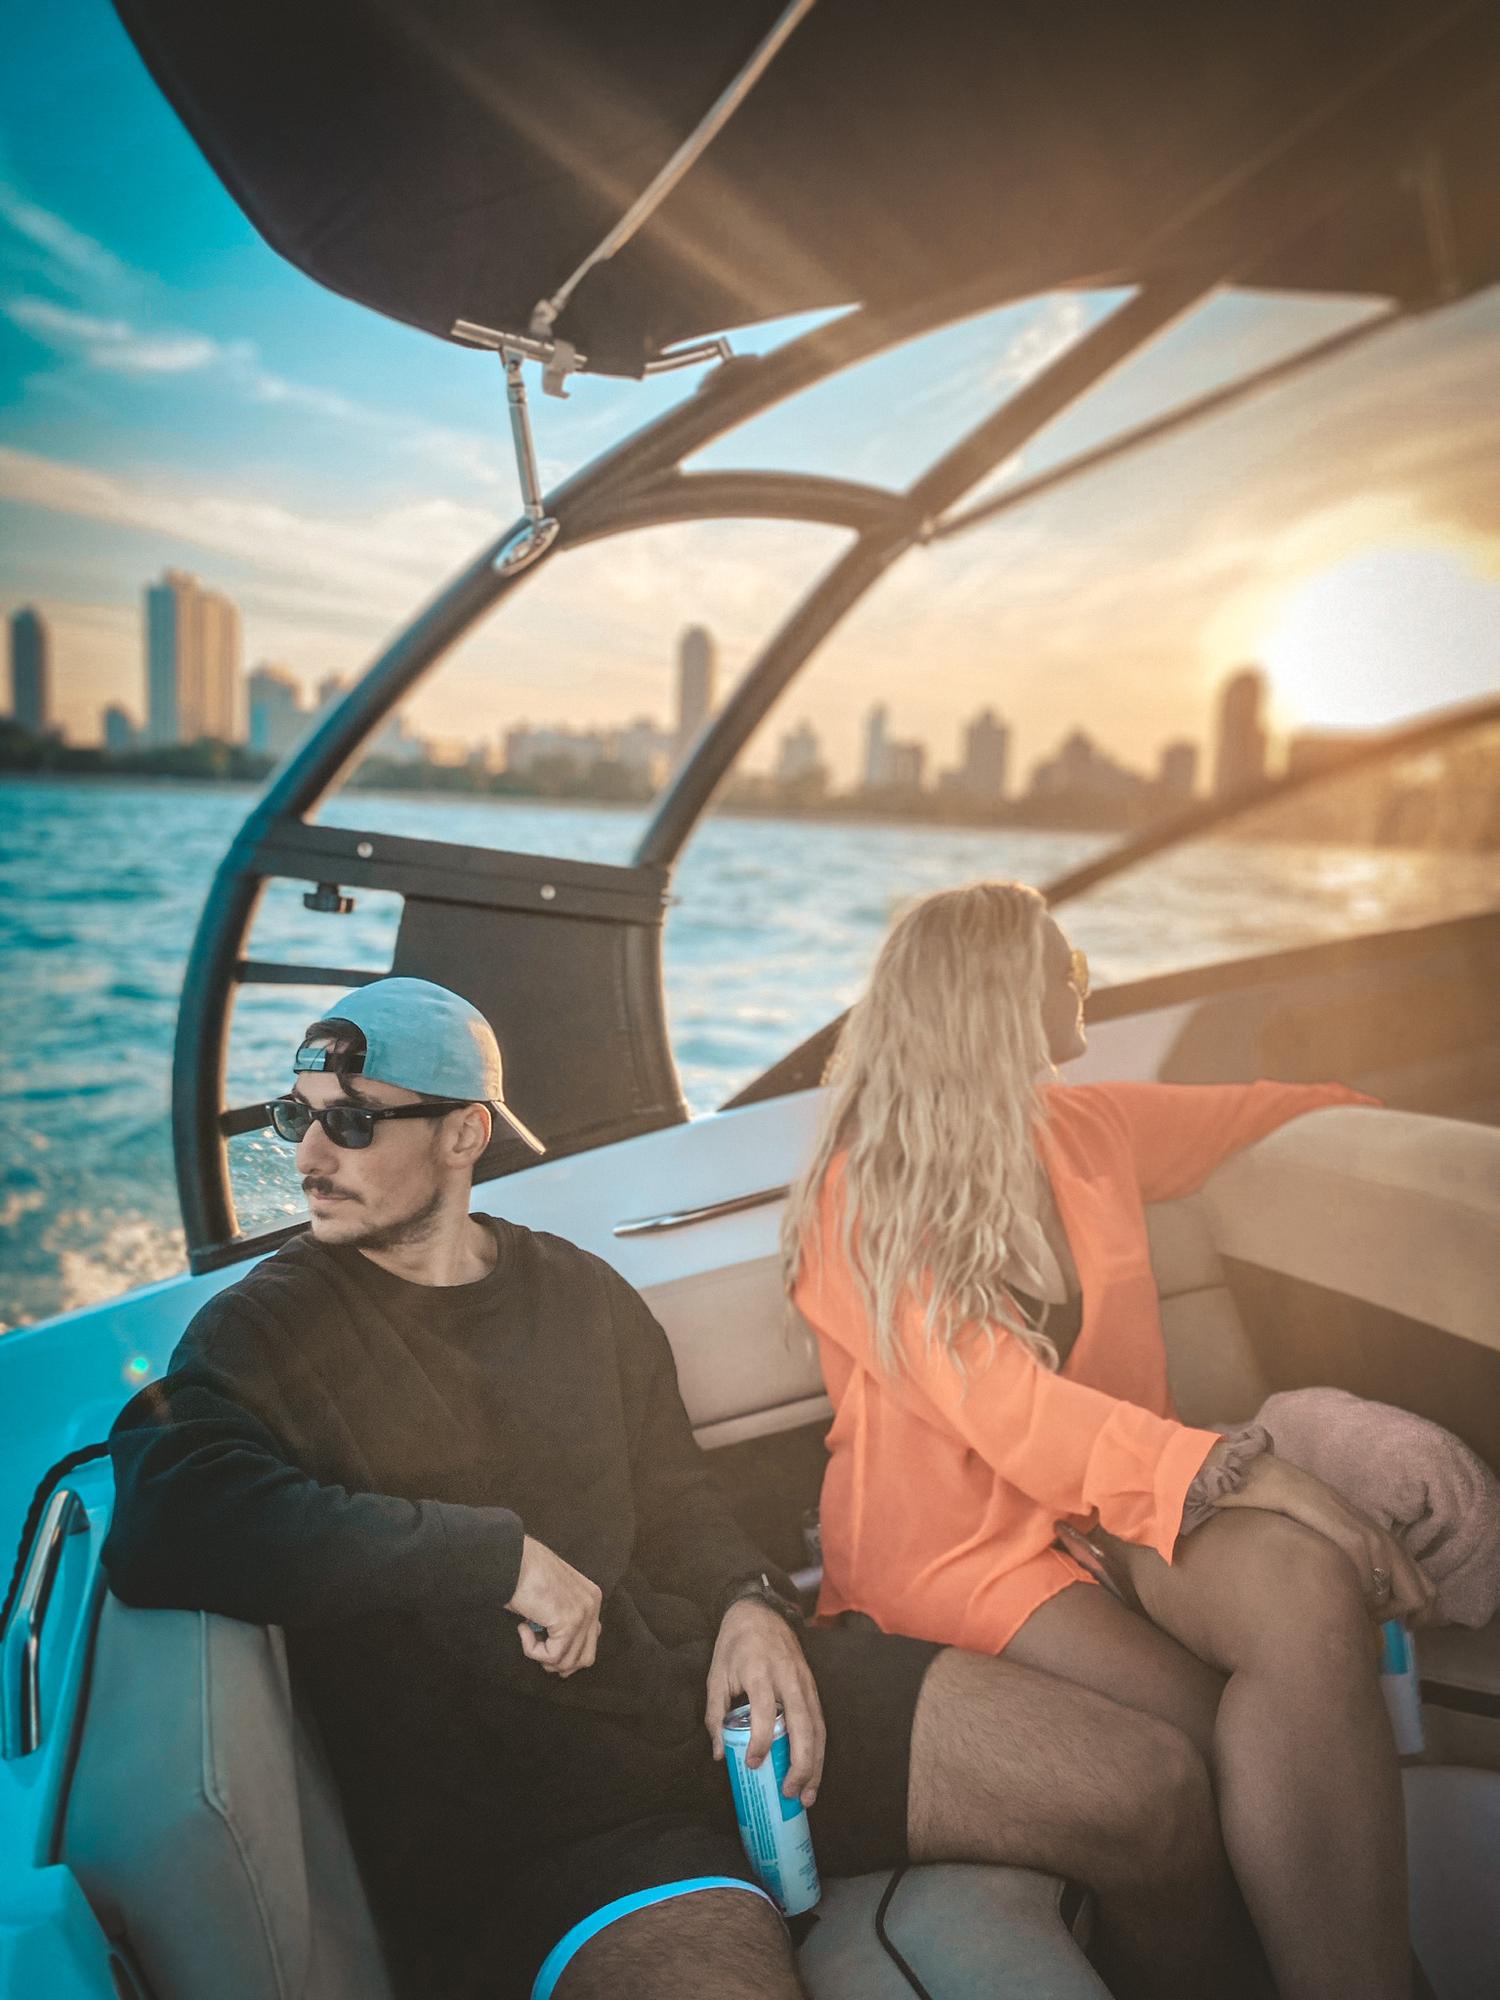 Grant & Mary enjoying a boat day in Chicago before they realized they would soon be leaving 2 years later to start their lives in St. Pete, FL. ☀️